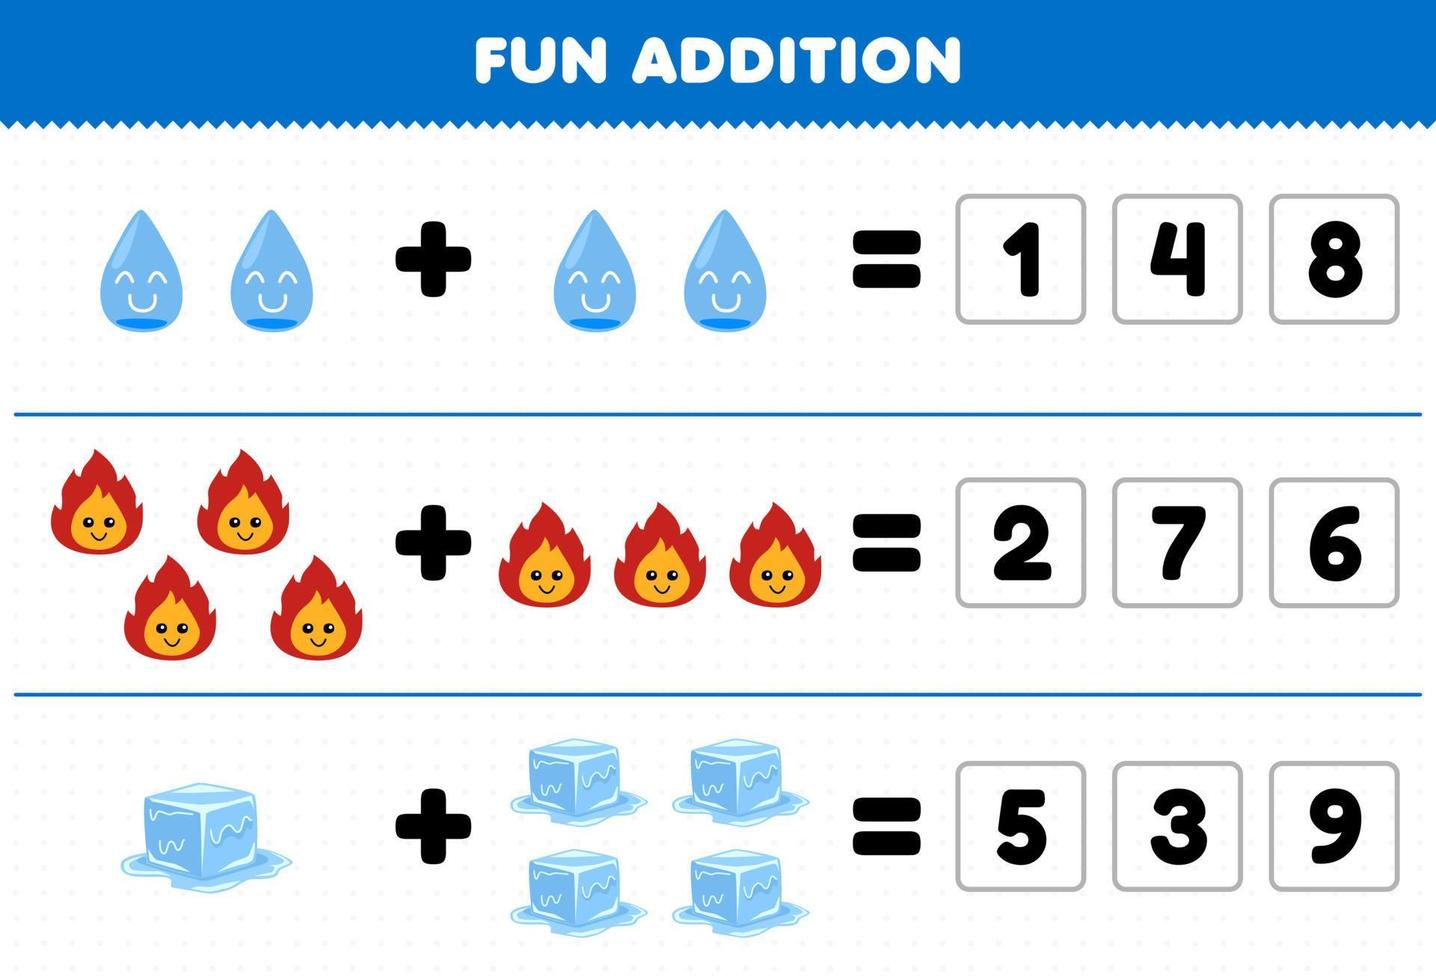 Education game for children fun addition by guess the correct number of cute cartoon water fire ice printable nature worksheet vector